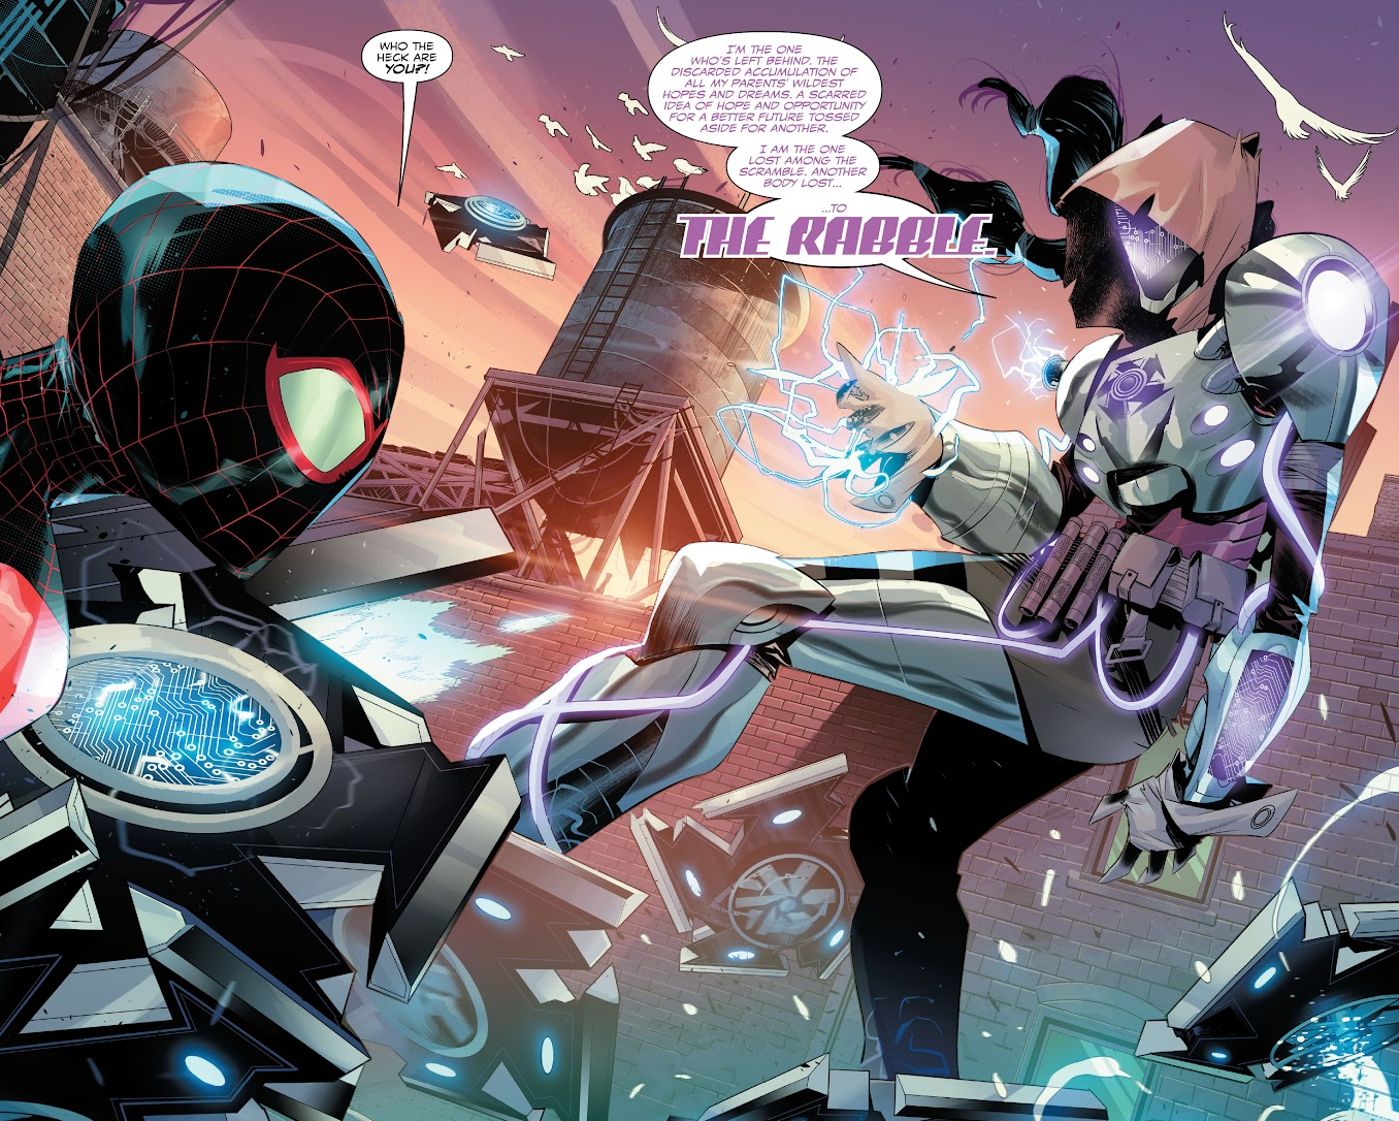 Rabble faces down Miles Morales and explains the origin of her name. 